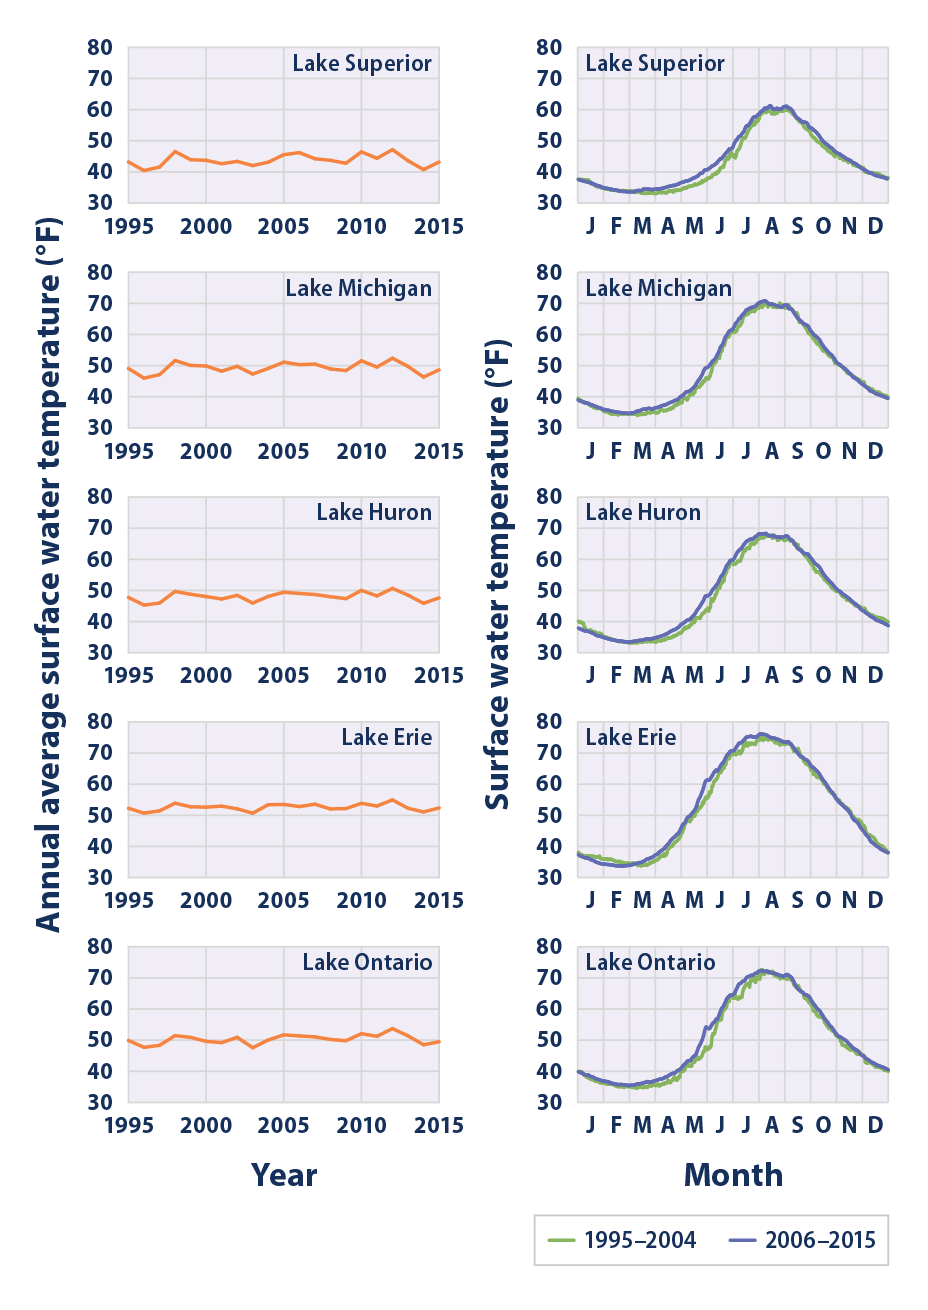 Line graphs showing water temperatures in each of the Great Lakes from 1995 to 2015.